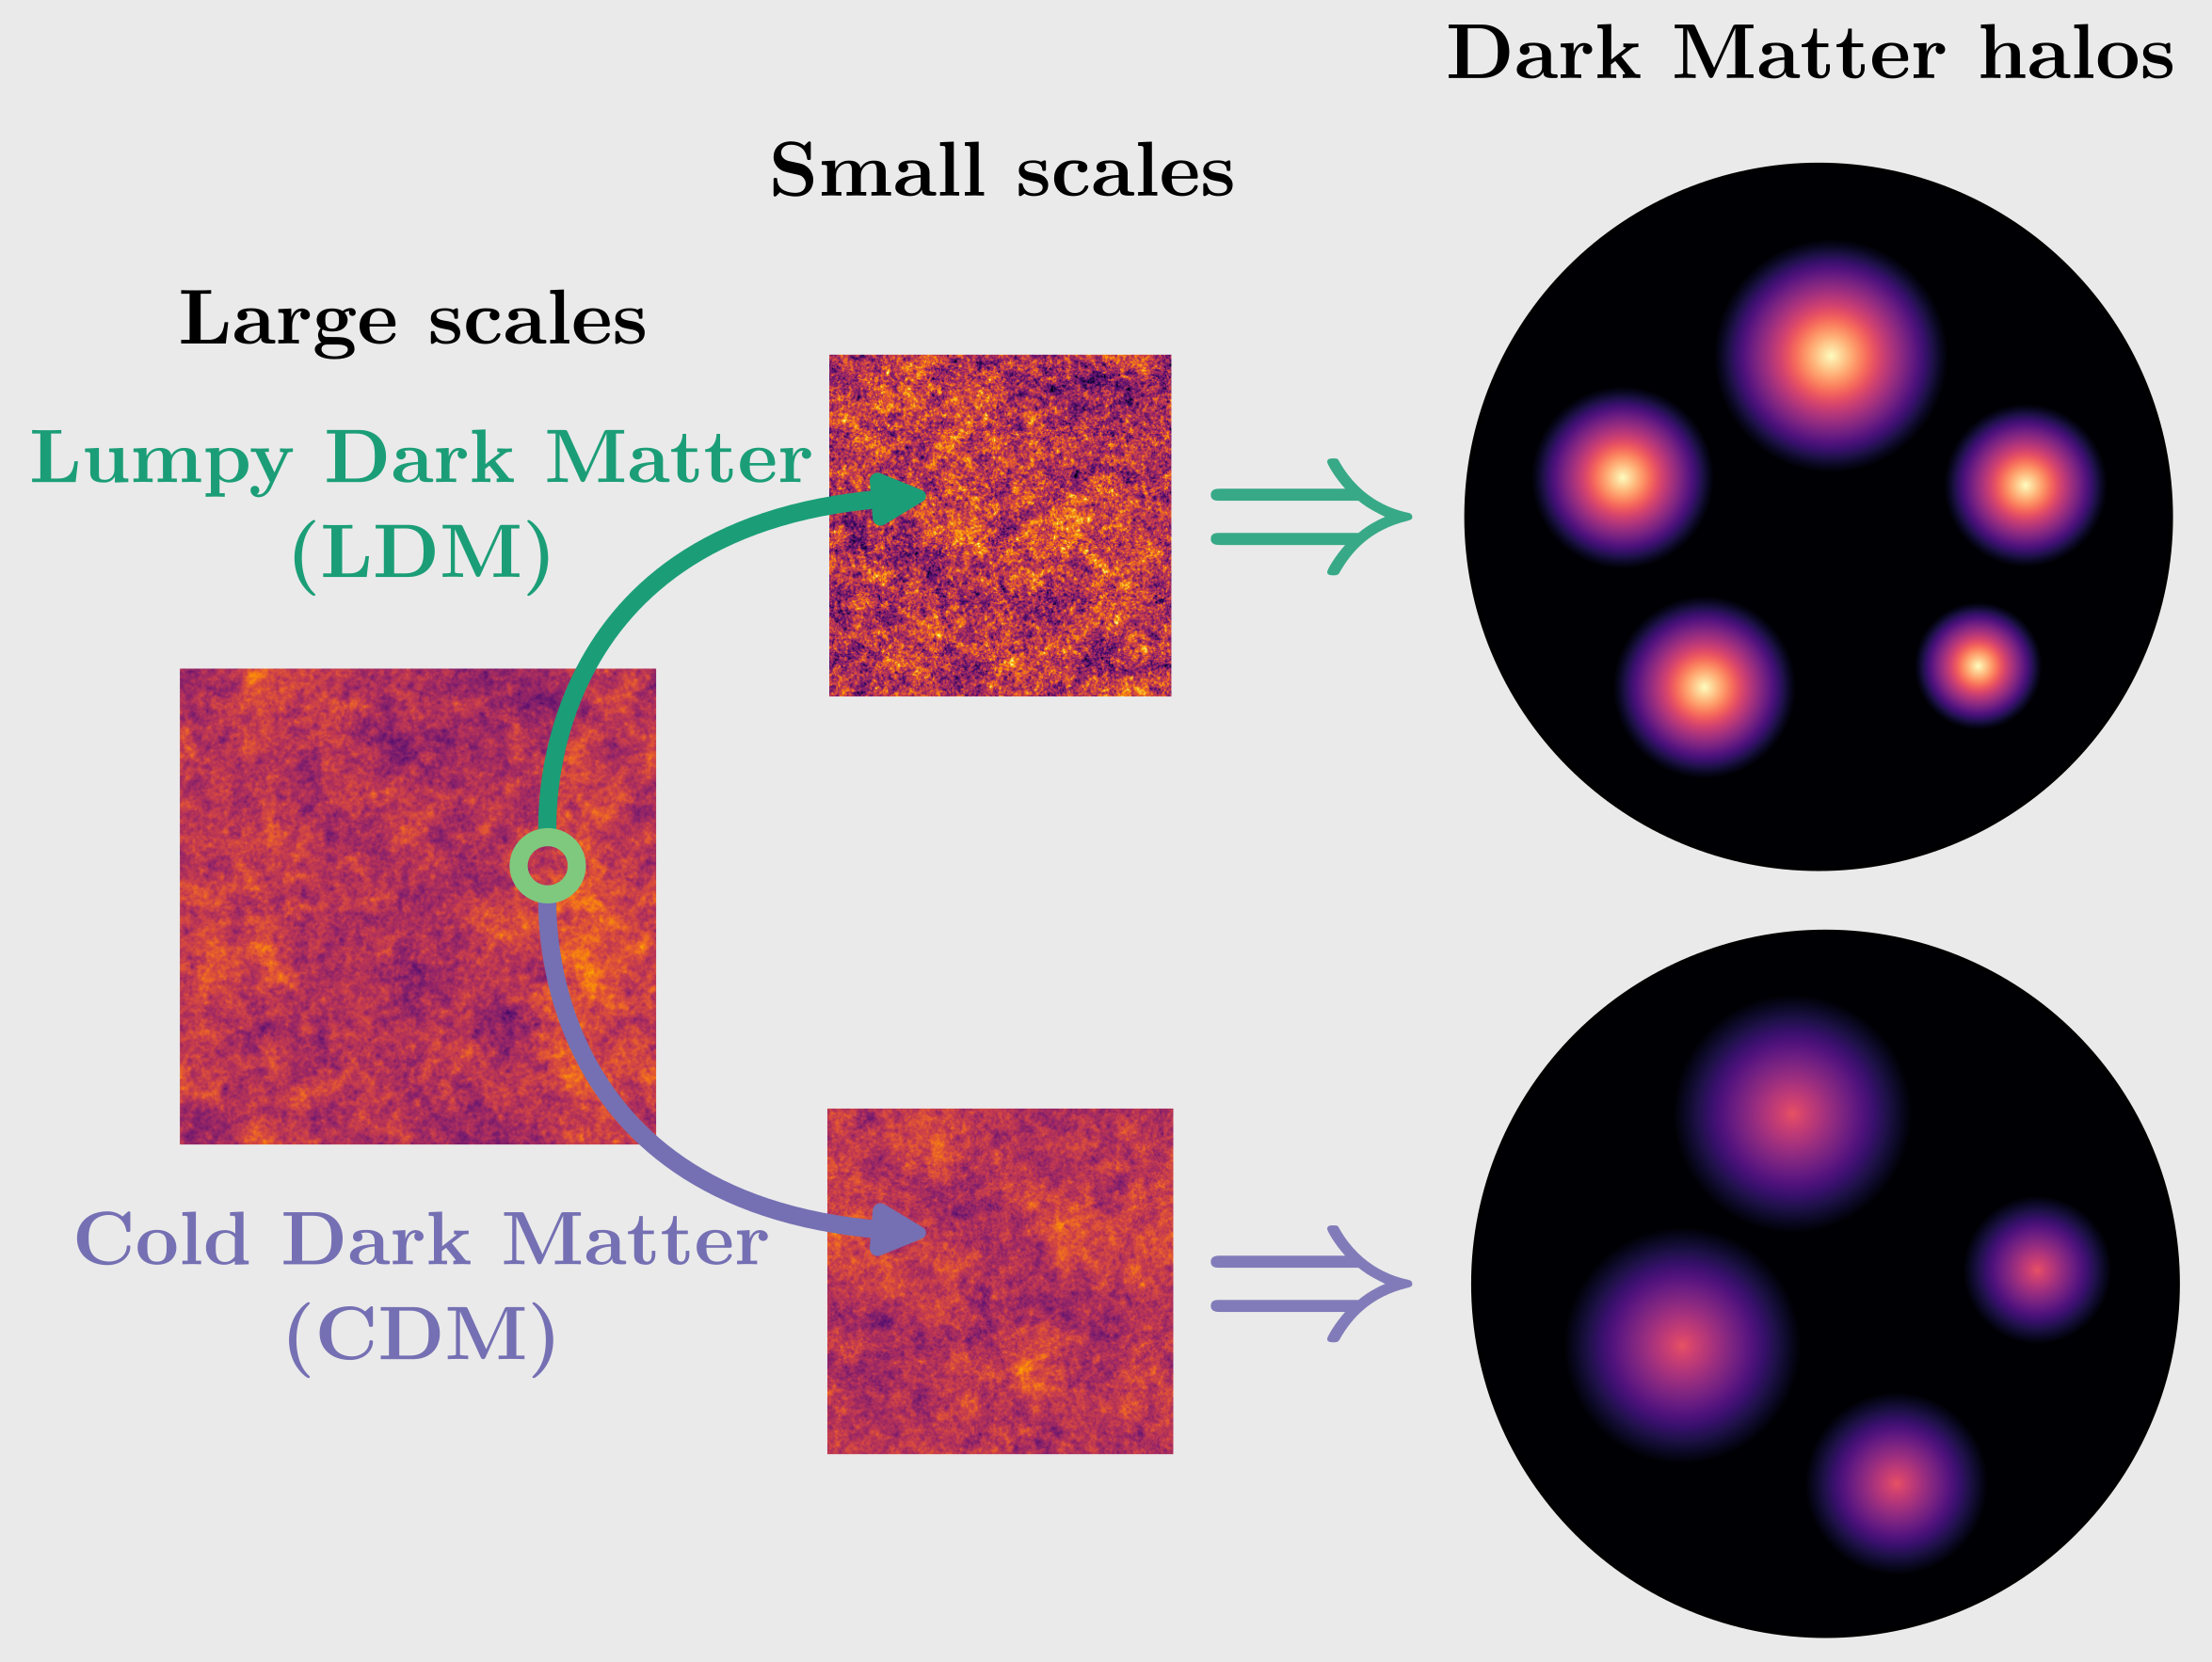 Dark Matter can have enhanced structure at small scales